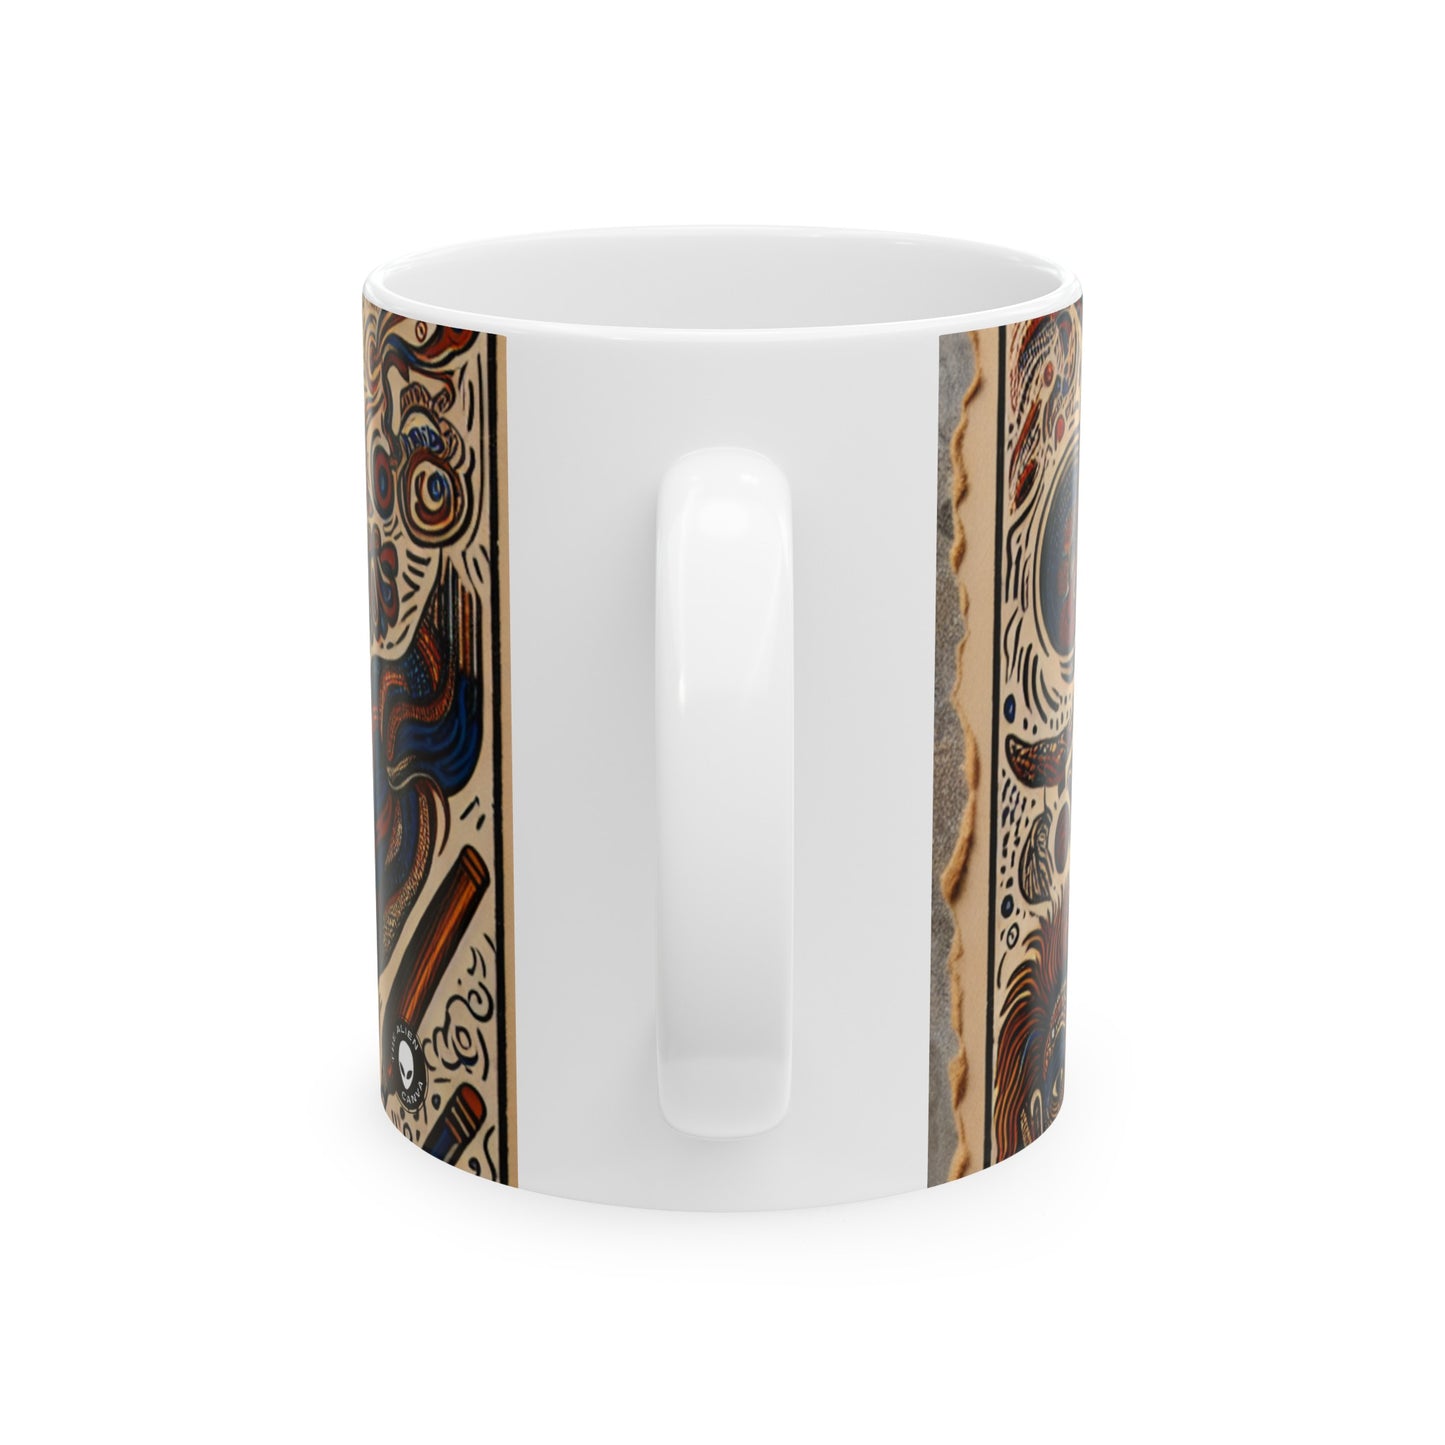 "Visions of the Beyond: A Surreal Dreamscape" - The Alien Ceramic Mug 11oz Outsider Art